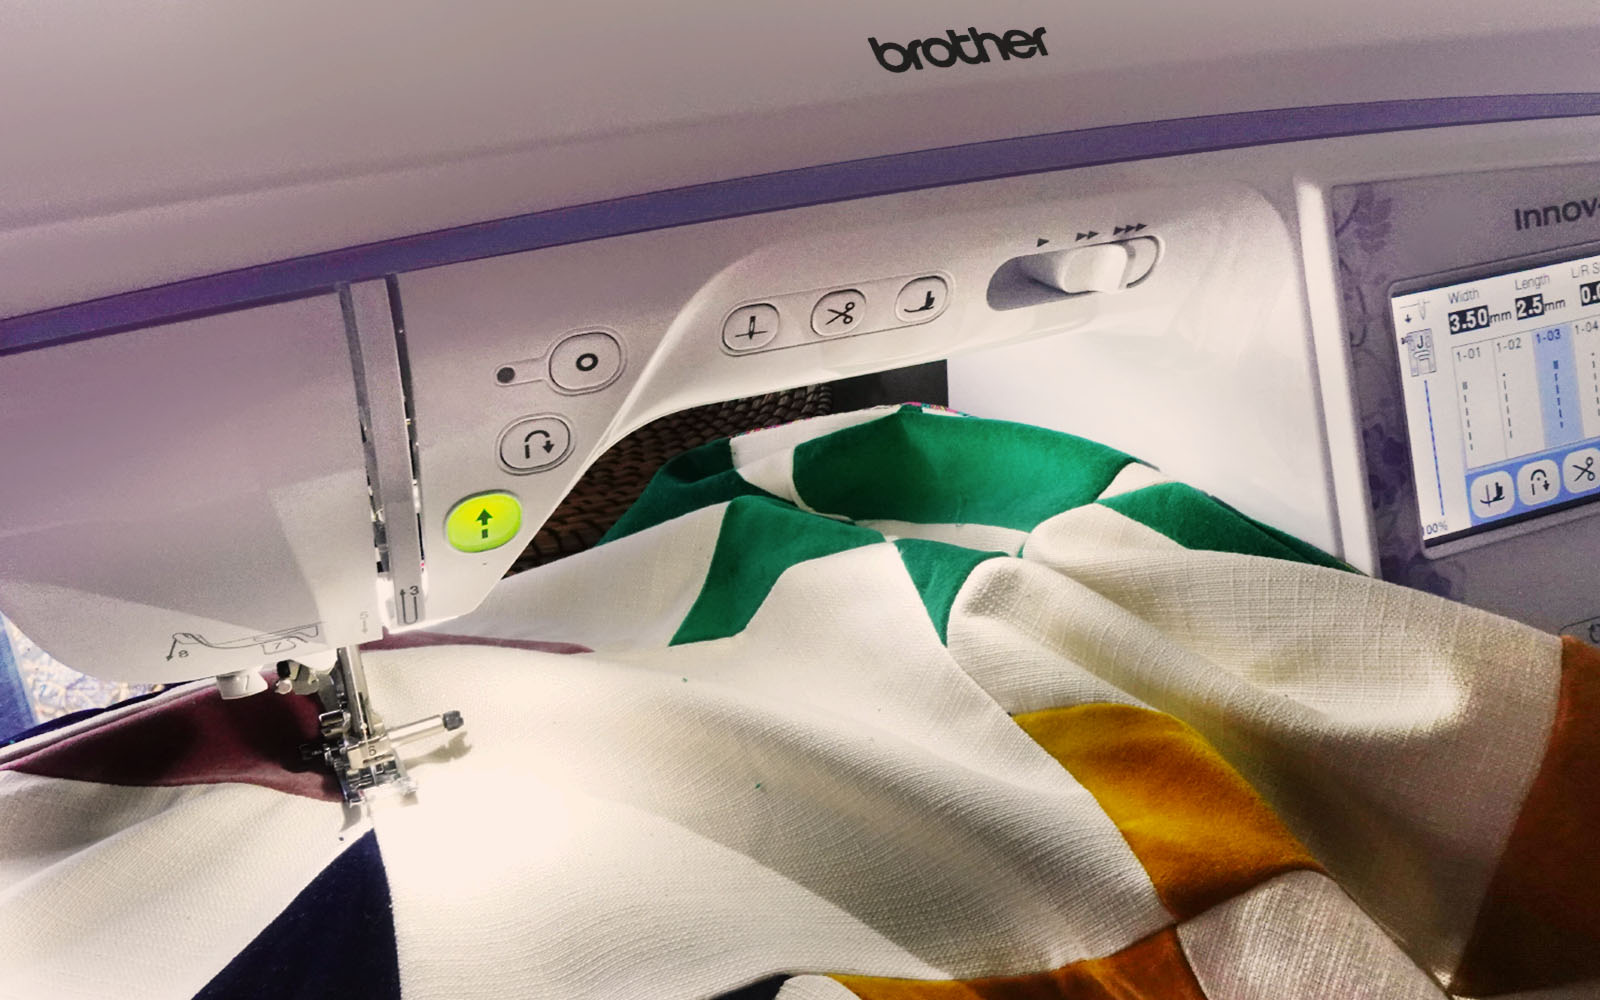 Sewing topstitch onto quilt on Brother NV2700